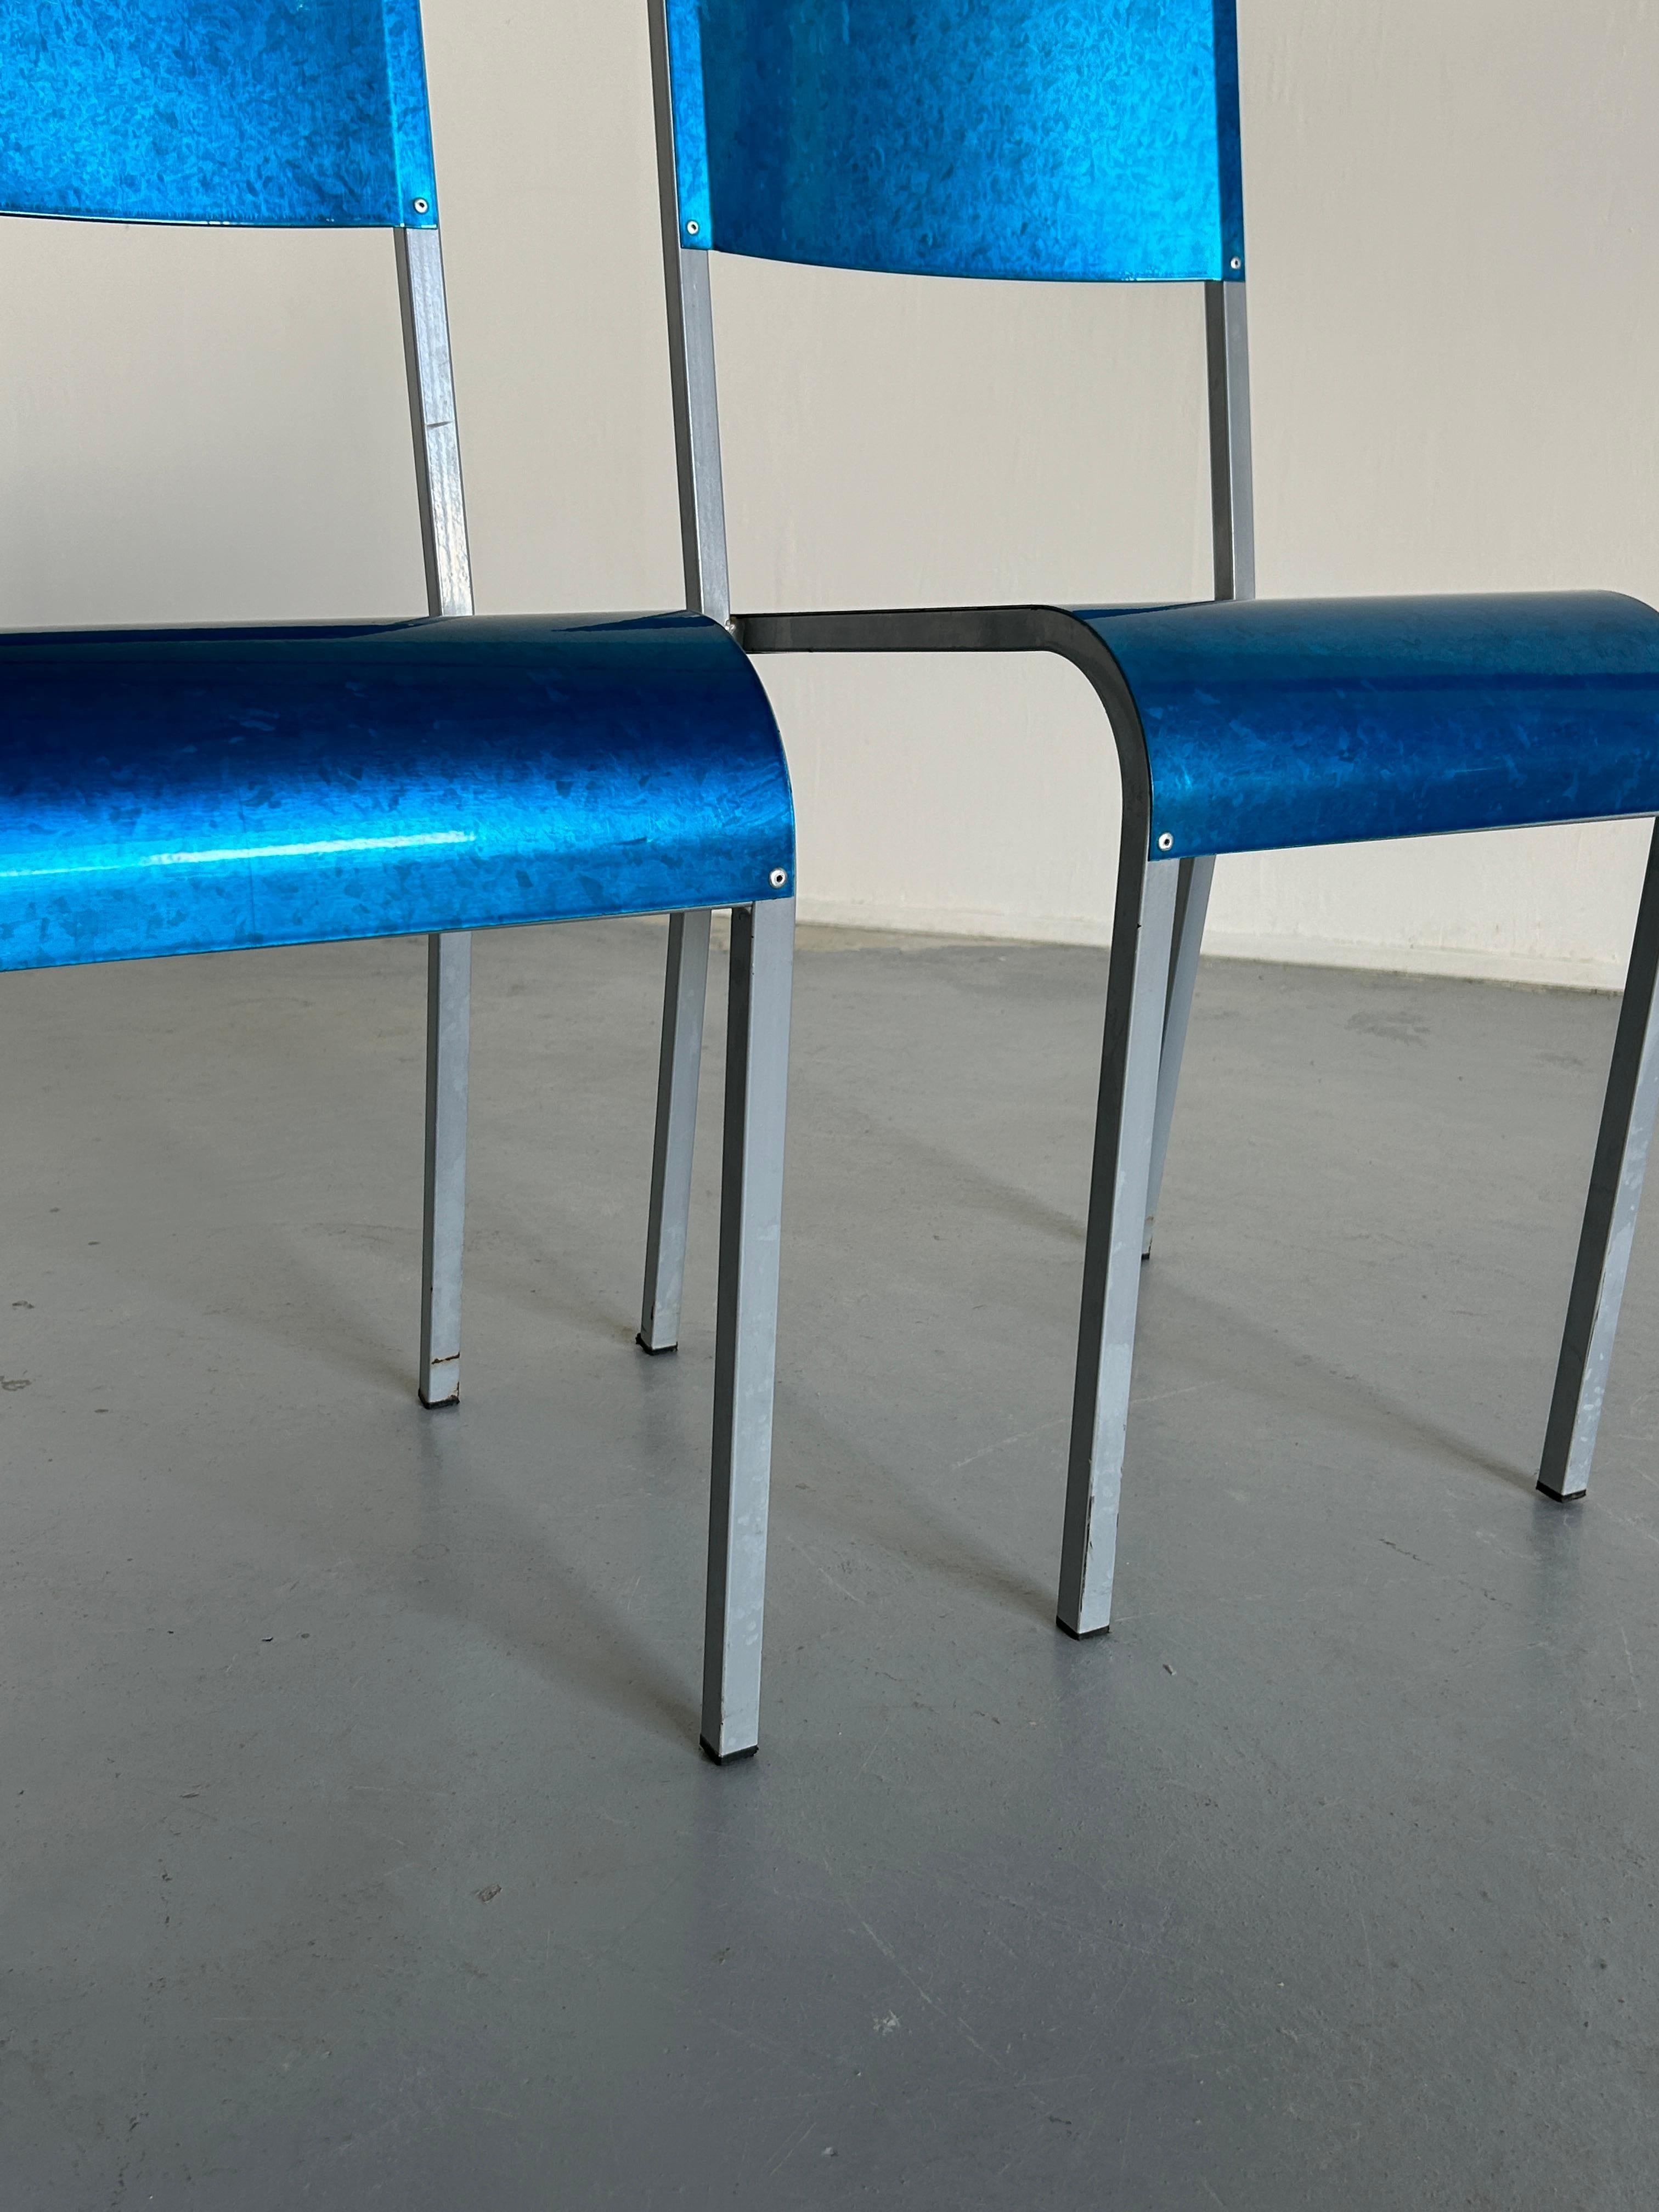 Pair of Blue Postmodern Industrial Metal Dining Chairs by Parisotto, 1980s Italy For Sale 2